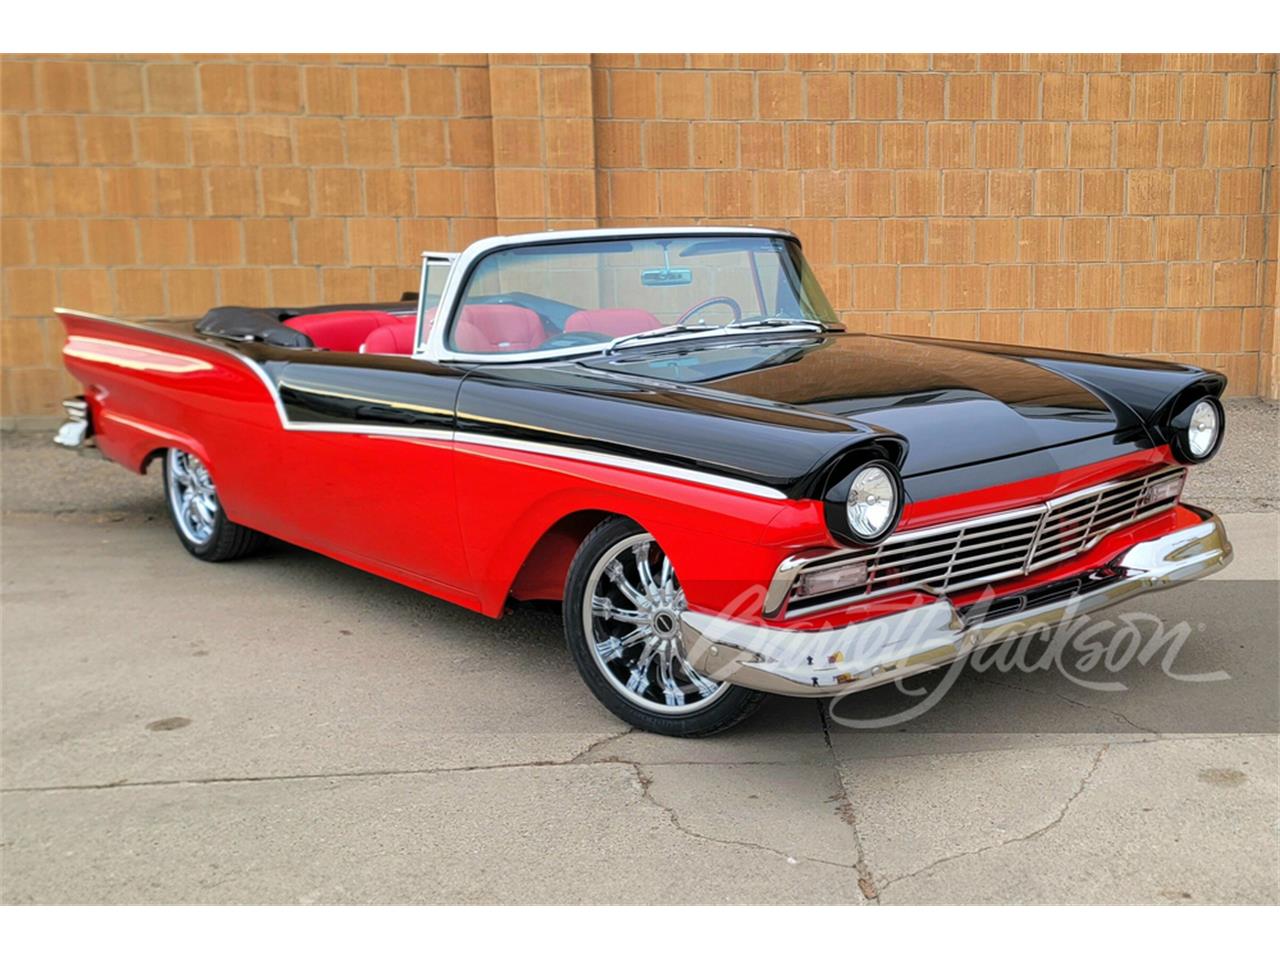 For Sale at Auction: 1957 Ford Fairlane 500 in Scottsdale, Arizona for sale in Scottsdale, AZ